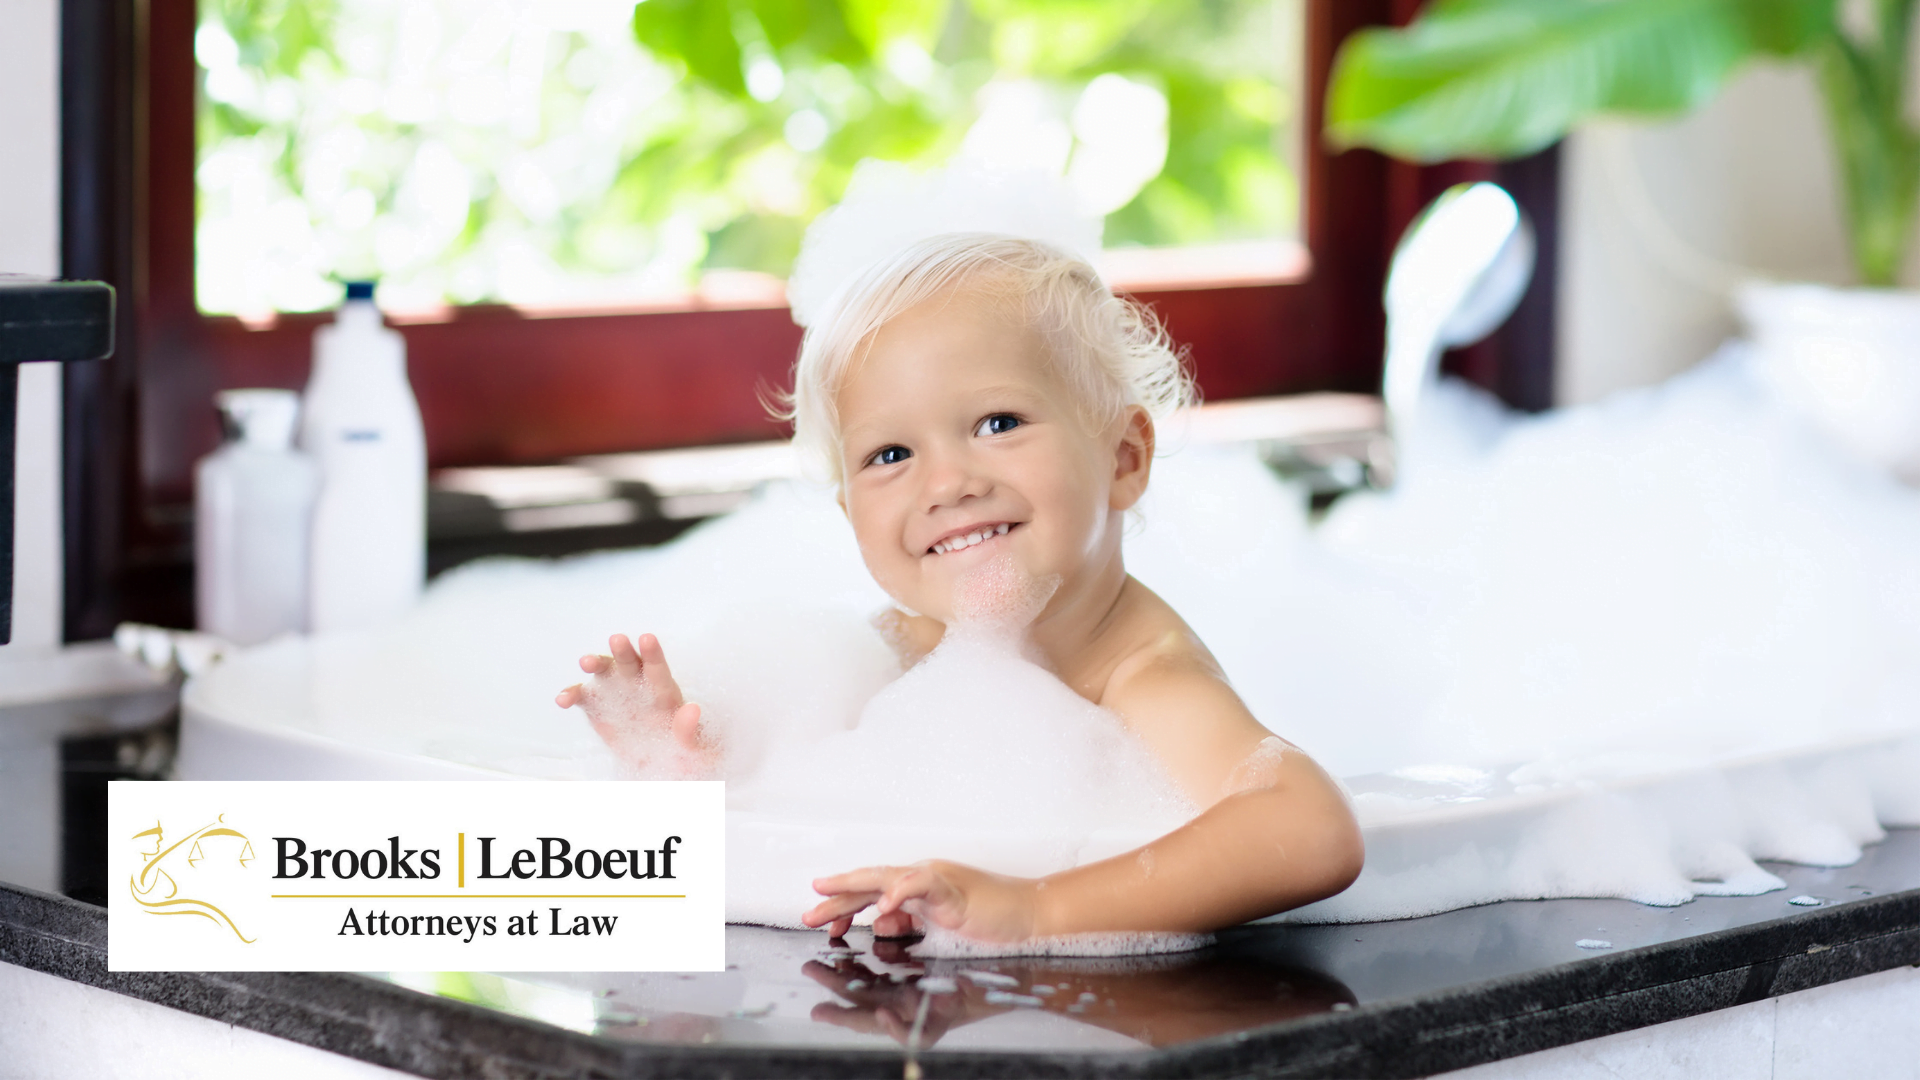 4 Safety Tips to Help Protect Your Child in the Bathtub